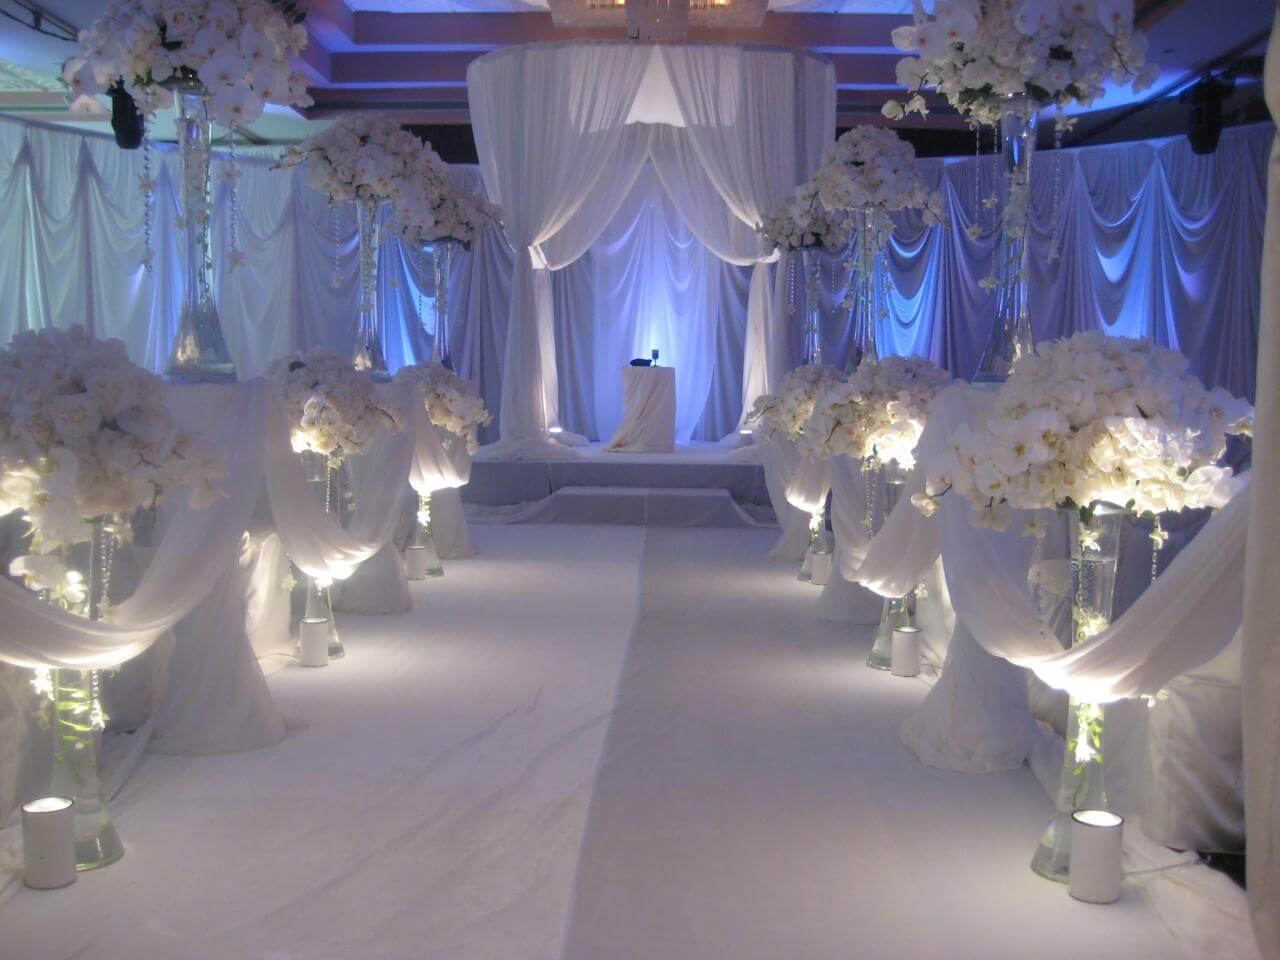 A wedding setup with white flowers and candles
